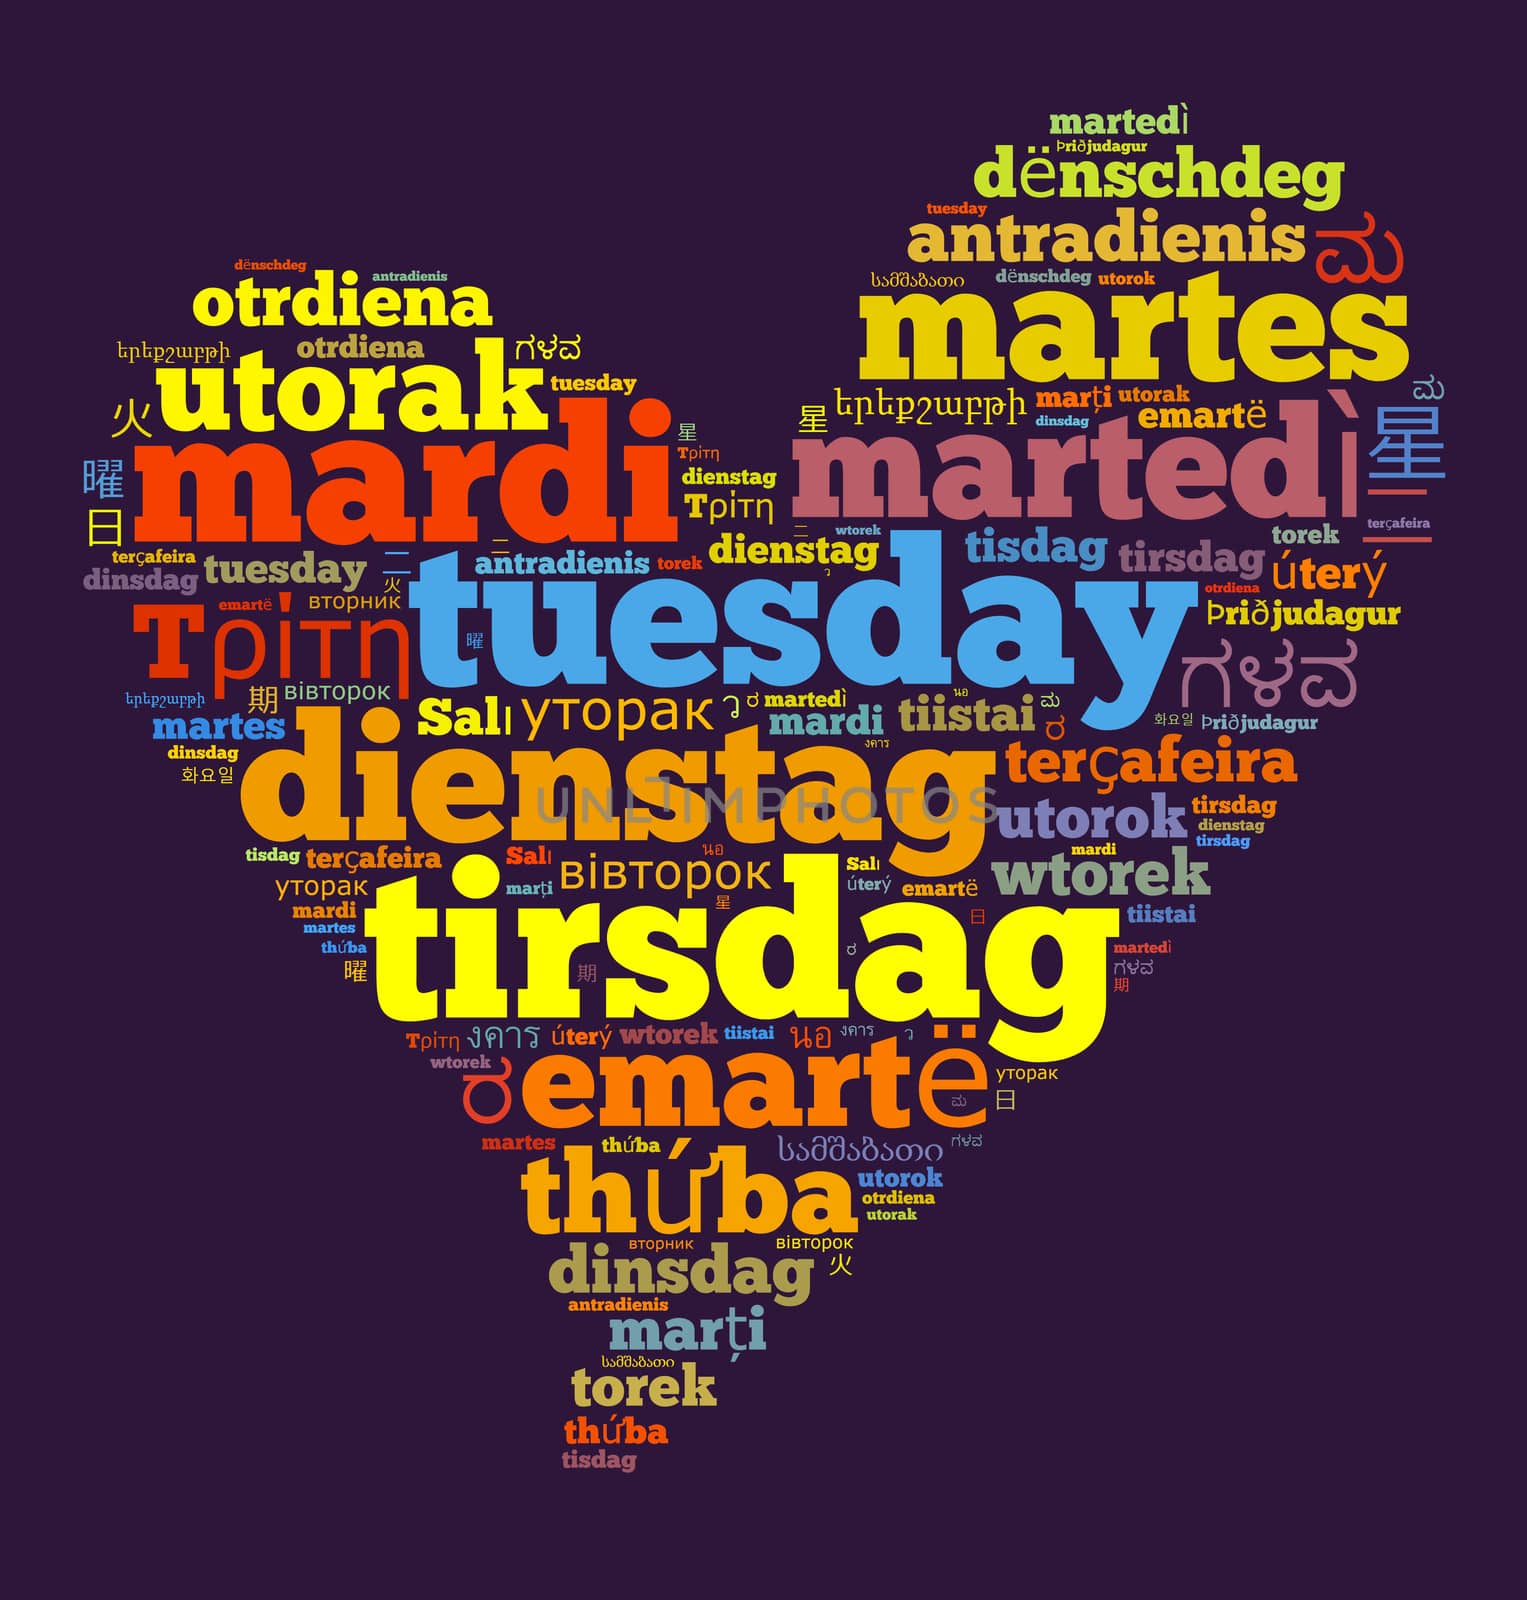 Word Tuesday in different languages by eenevski